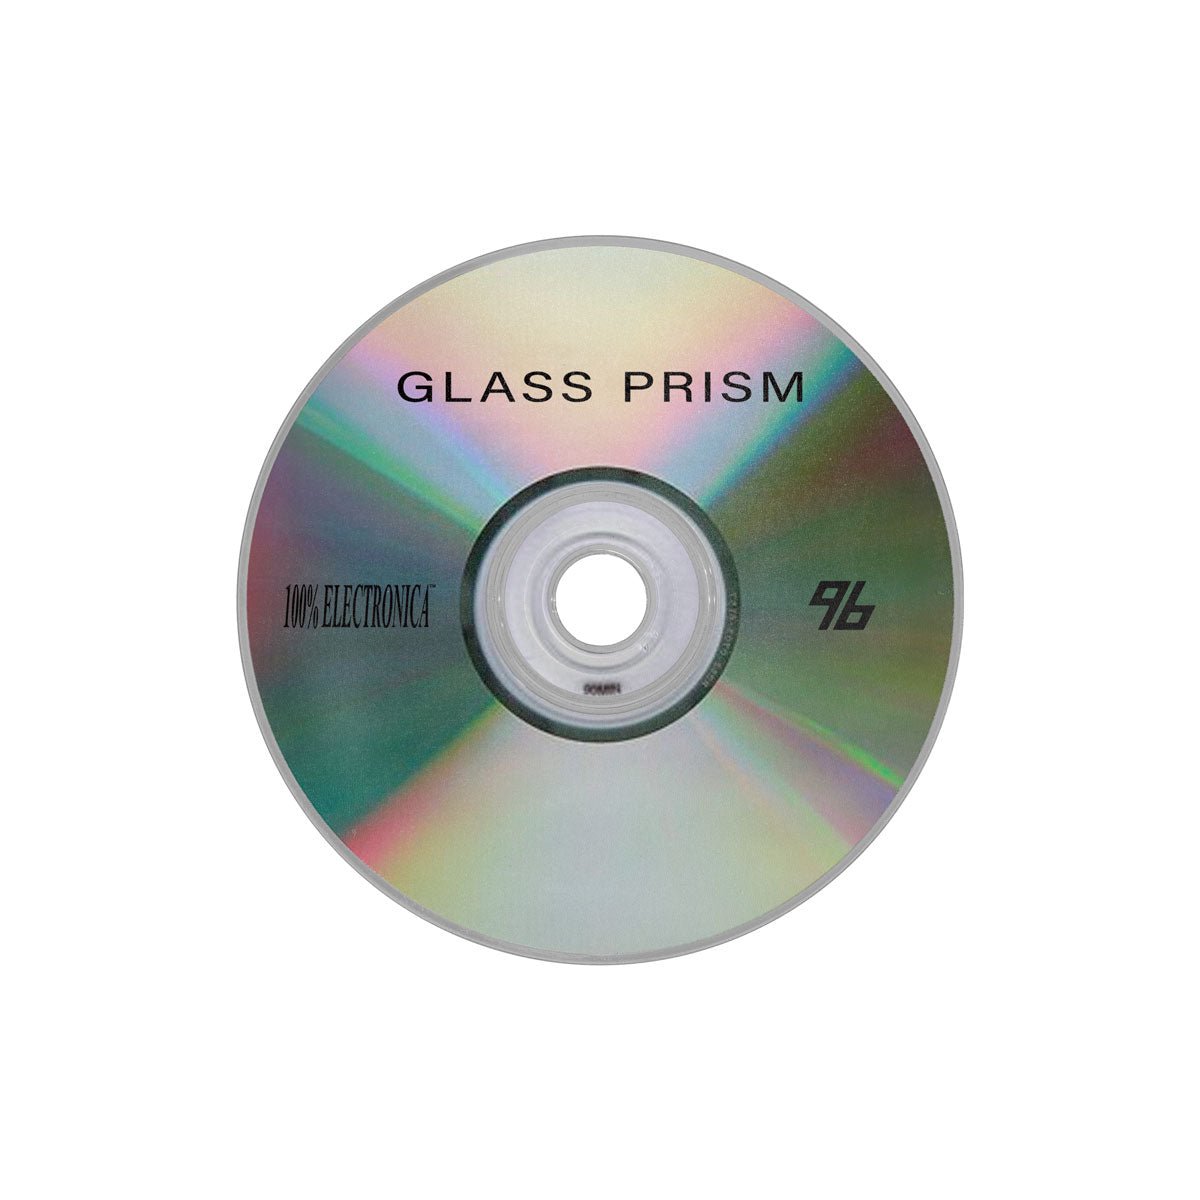 Windows 96 - Glass Prism CD - 100% Electronica Official Store (Photo 2)